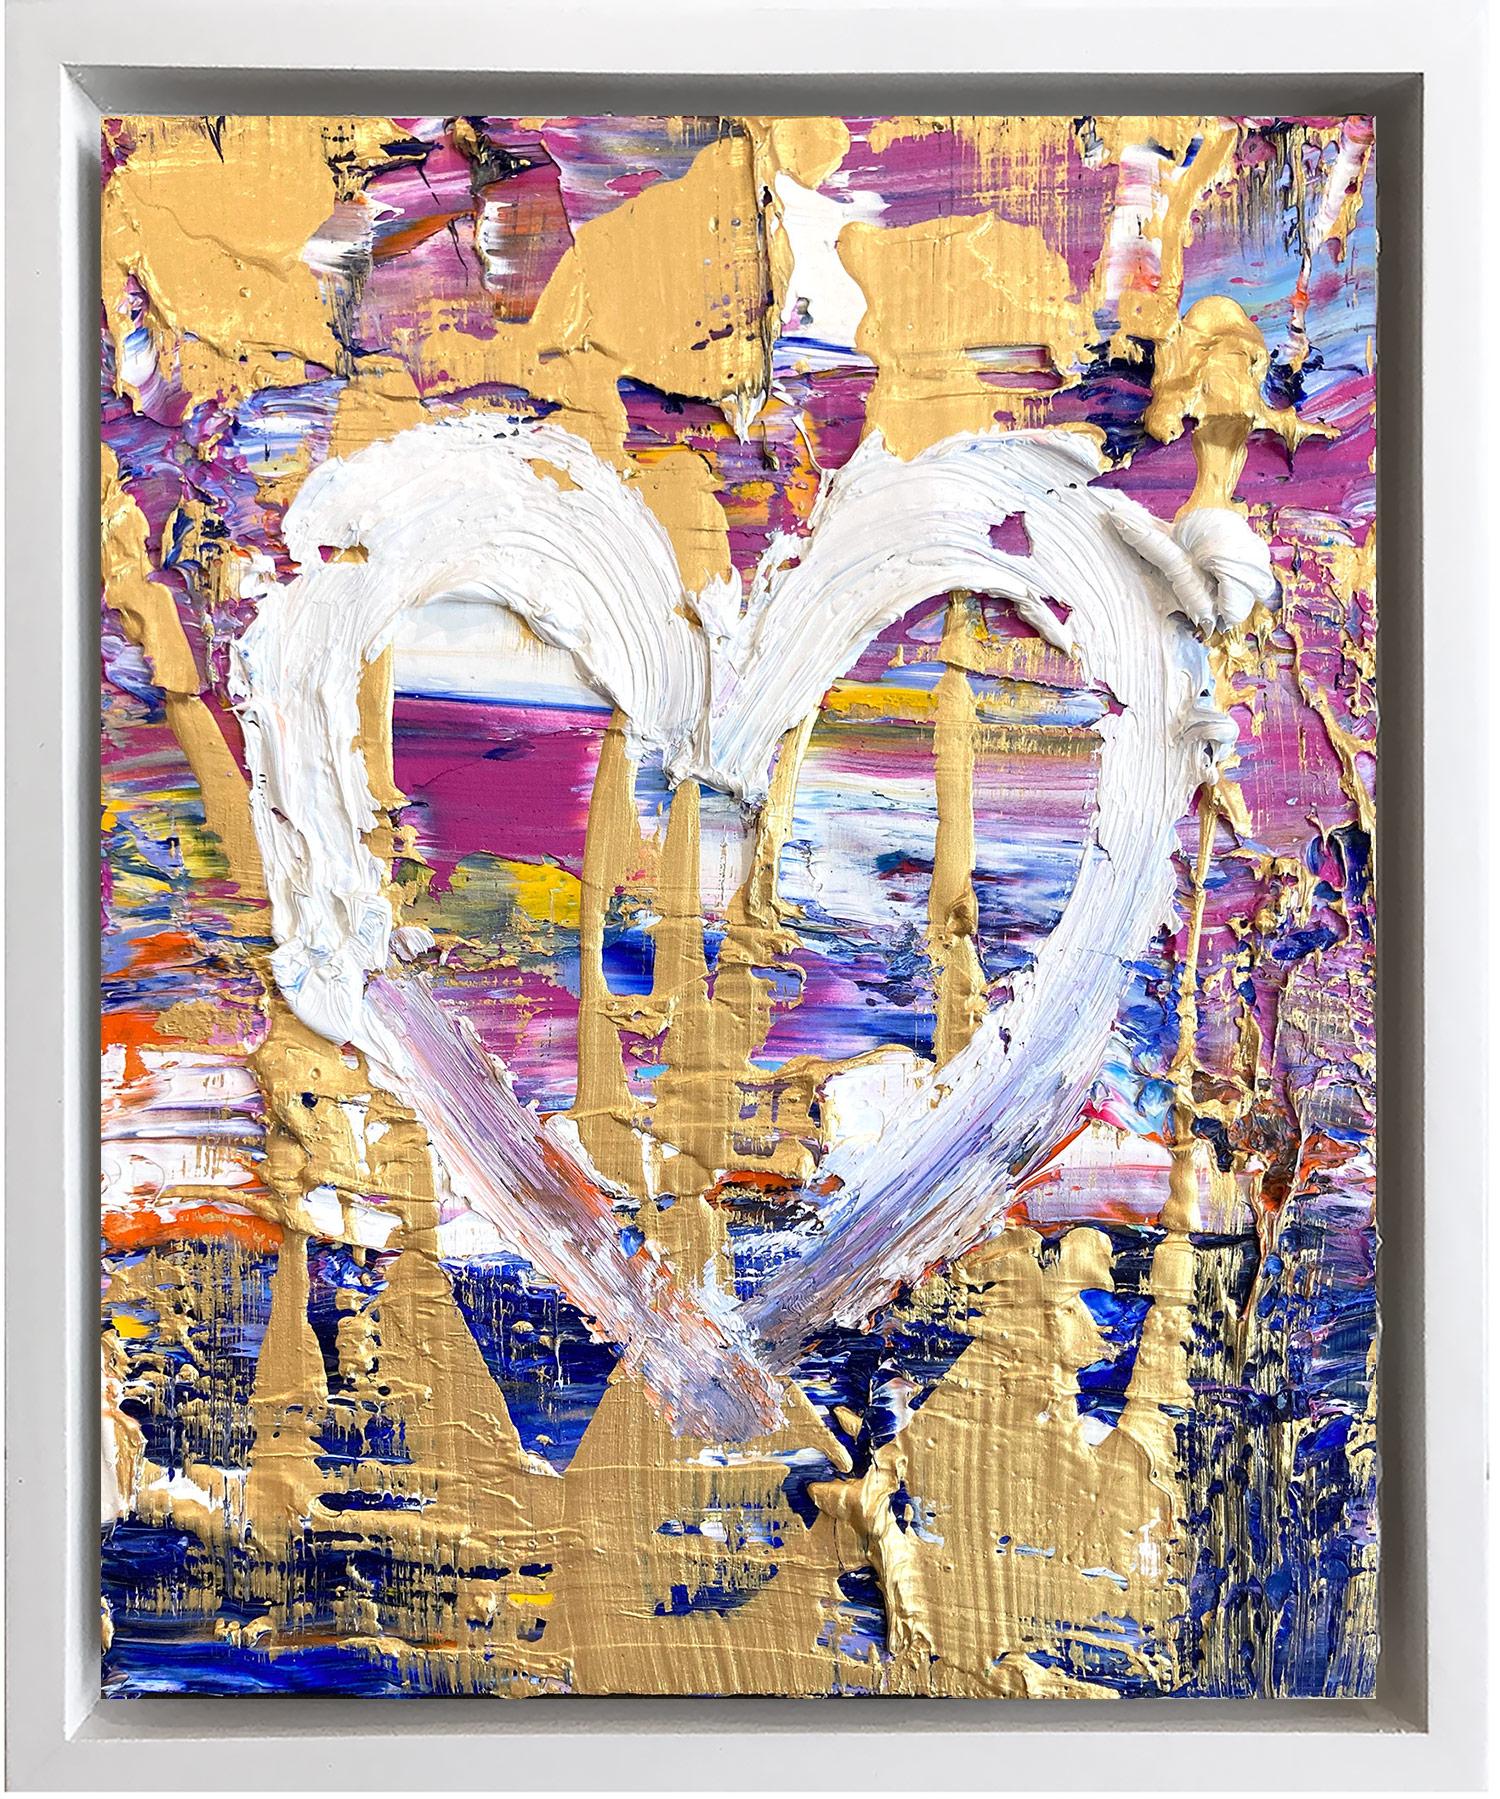 Cindy Shaoul Figurative Painting - "My Forever Young Heart" Contemporary Pop Art Oil Painting with Floater Frame